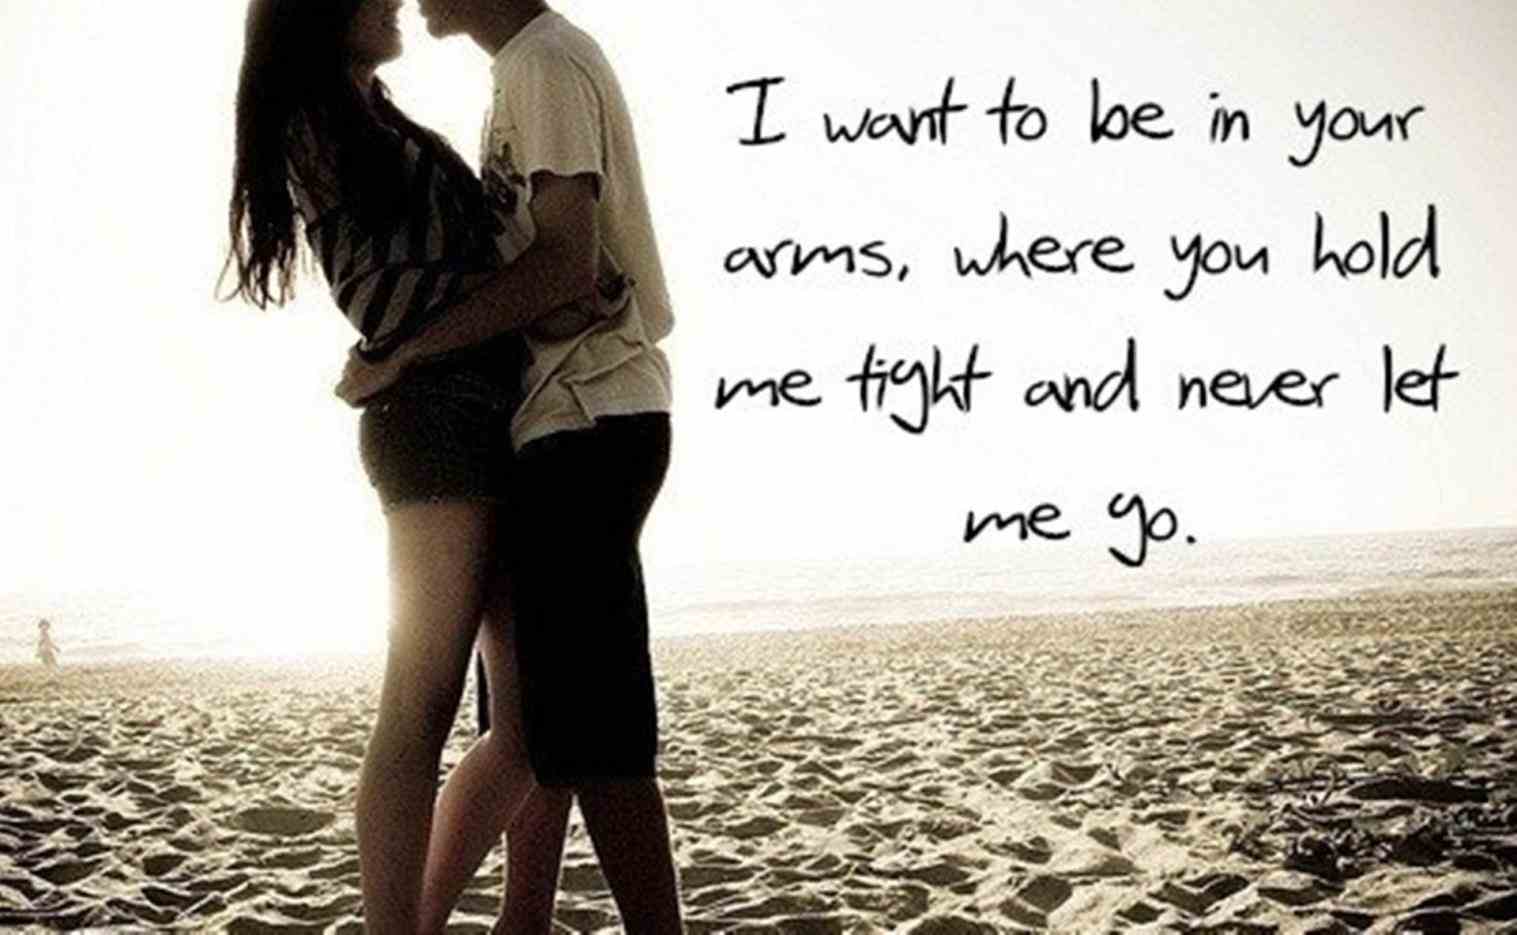 Cute Love Pictures Of Couples With Quotes Couples Hug - Love Wallpapers Hd With Quotes , HD Wallpaper & Backgrounds